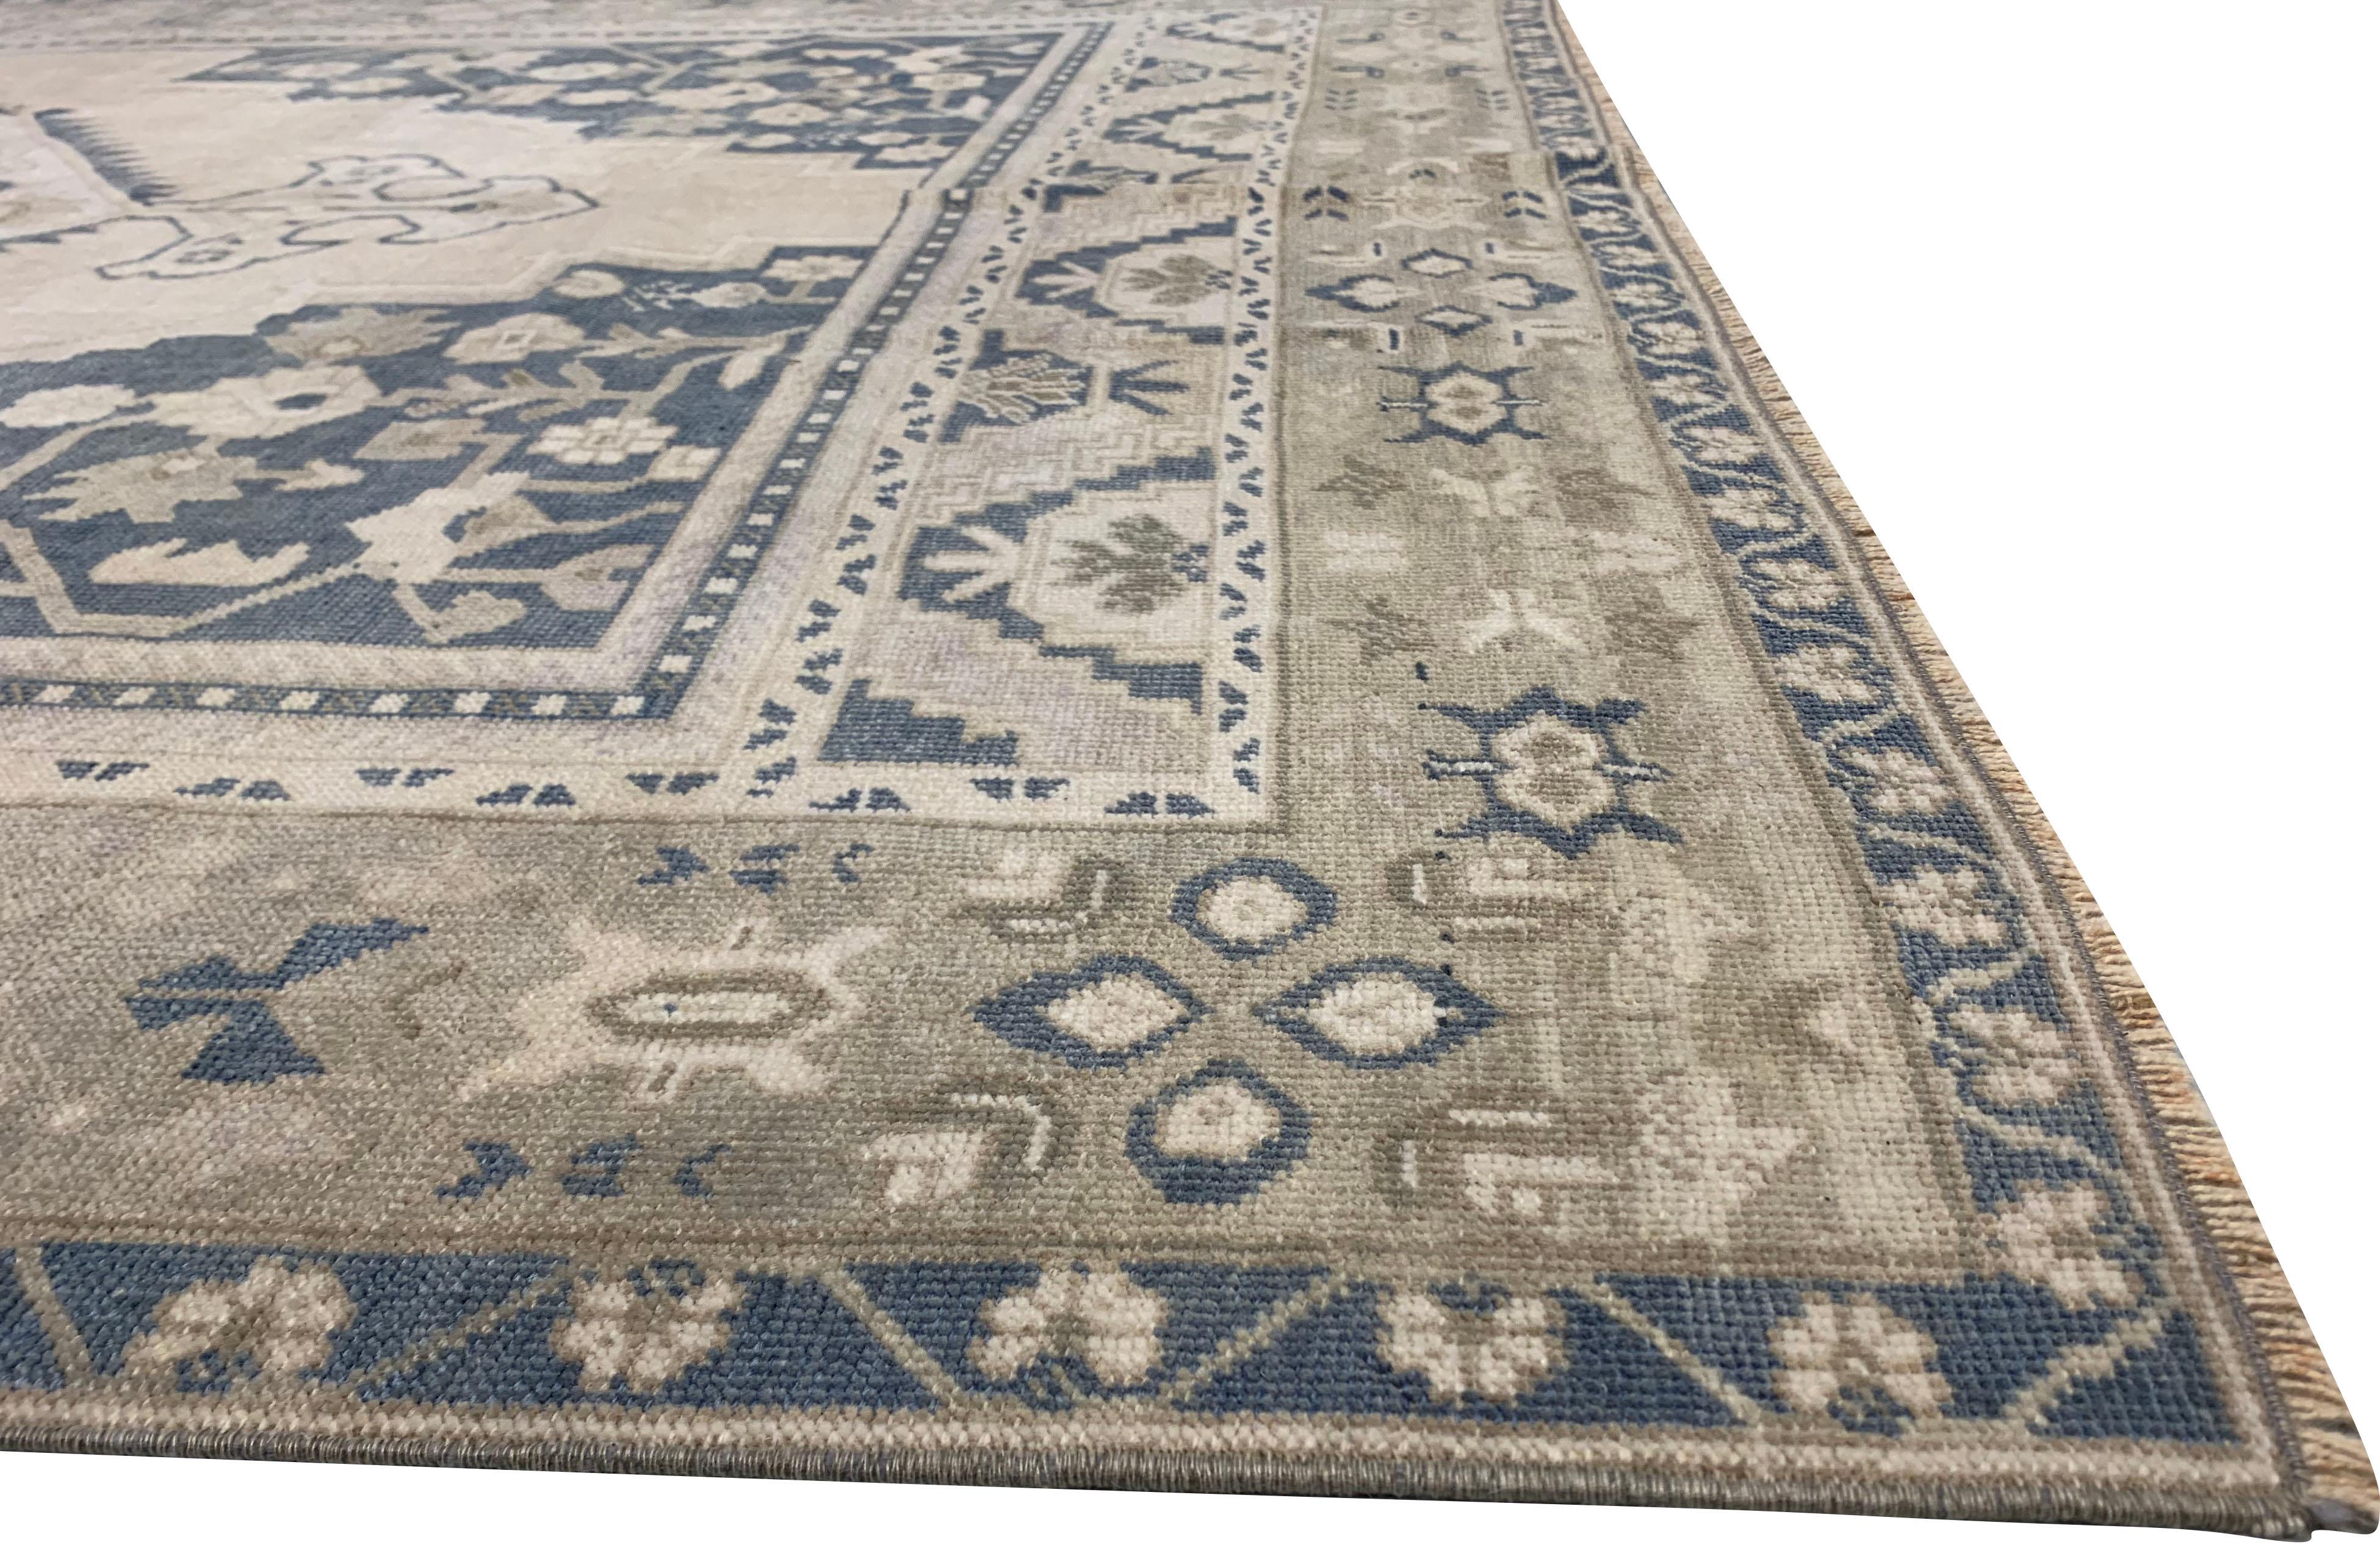 Vintage Turkish Oushak Area Rug  6' x 11'8 In Good Condition For Sale In New York, NY